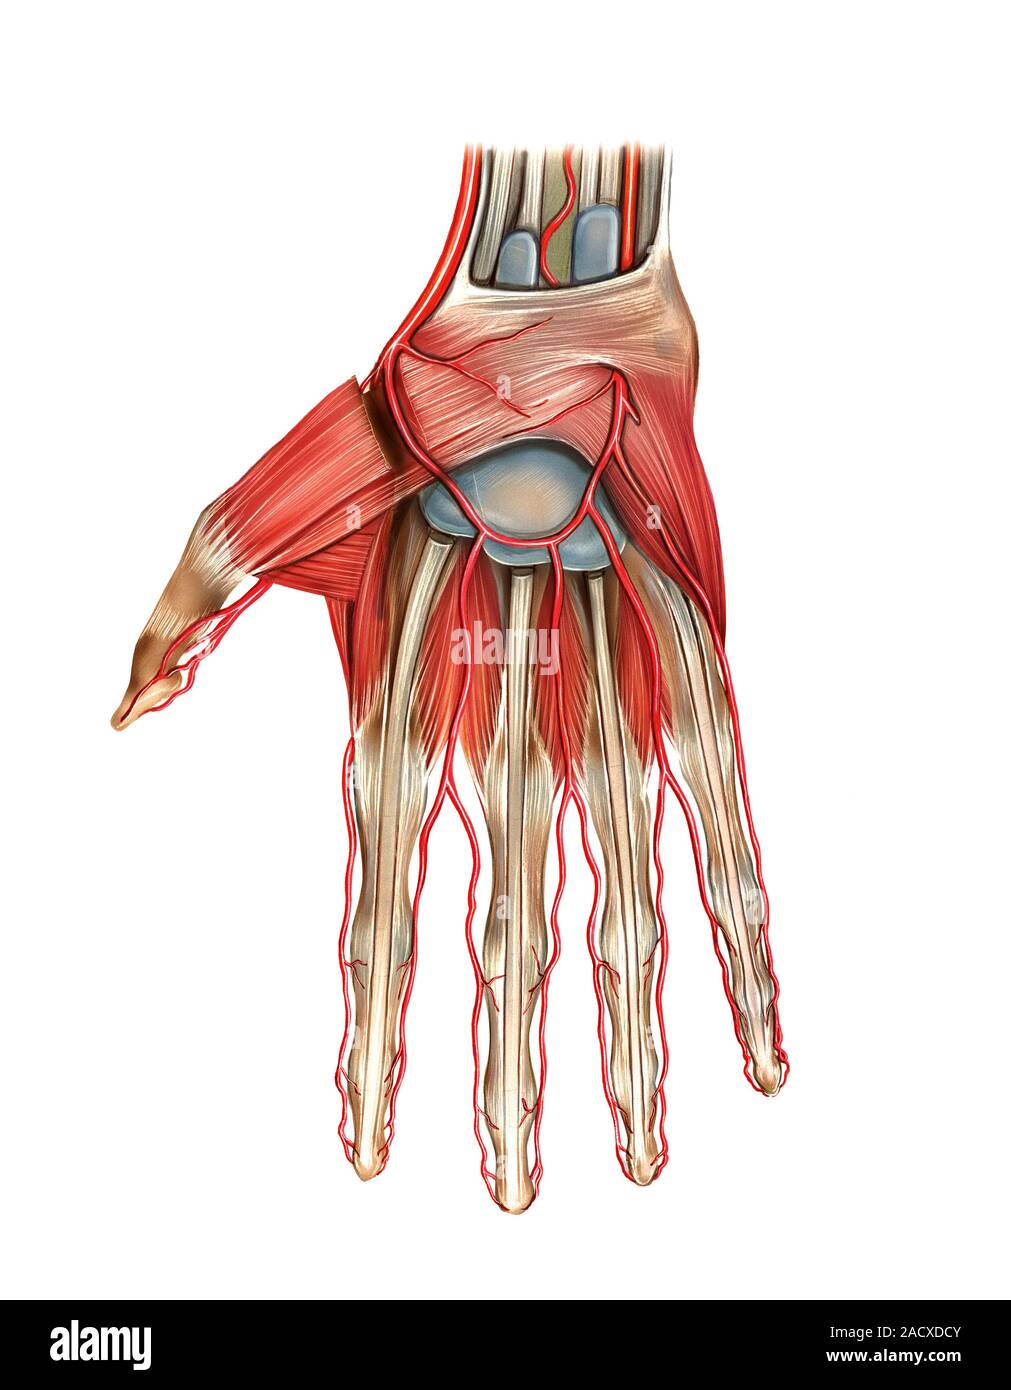 Illustration Of The Arterial System Of The Upper Limb Hand This Superficial Palmar View 0723